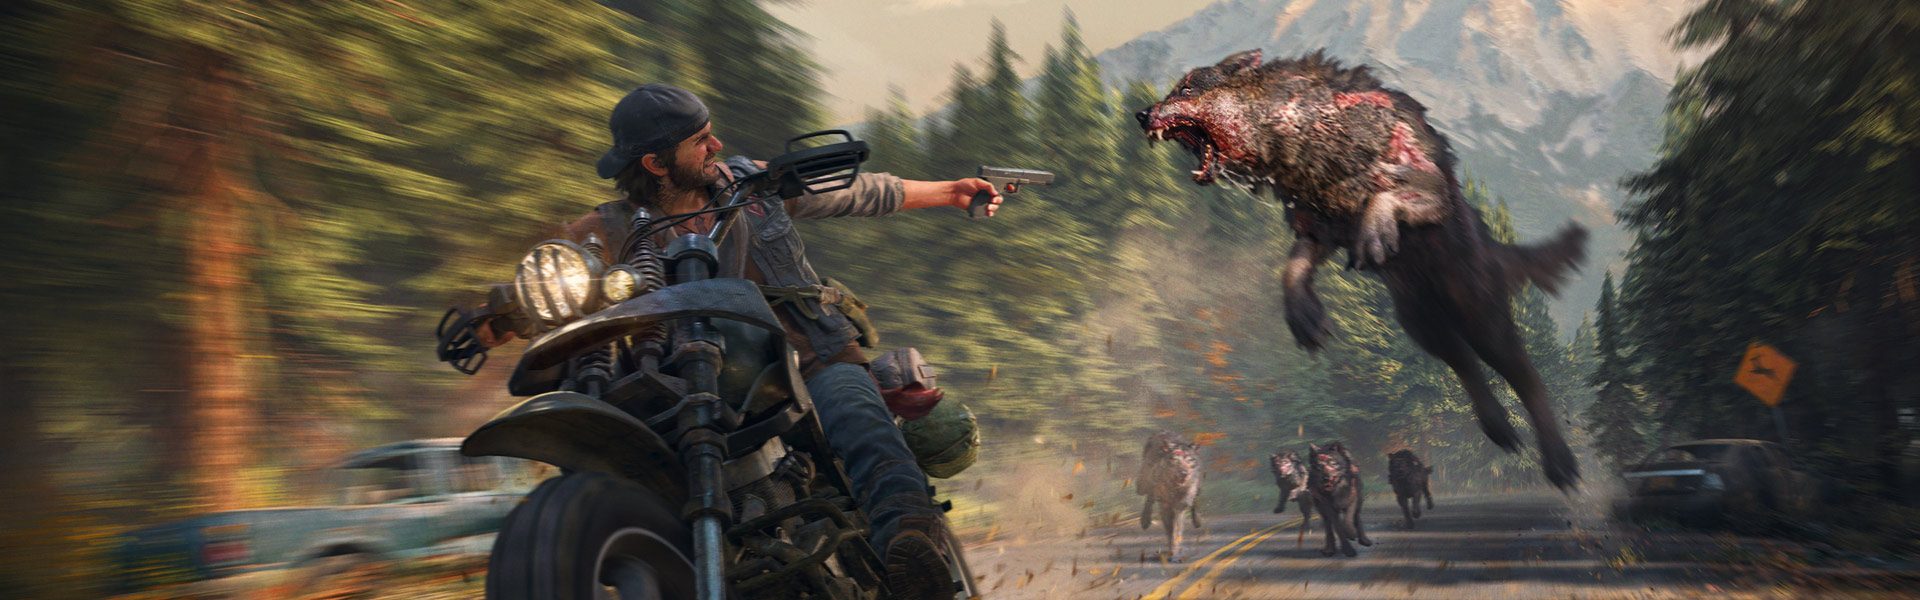 days gone ps4 playstation store